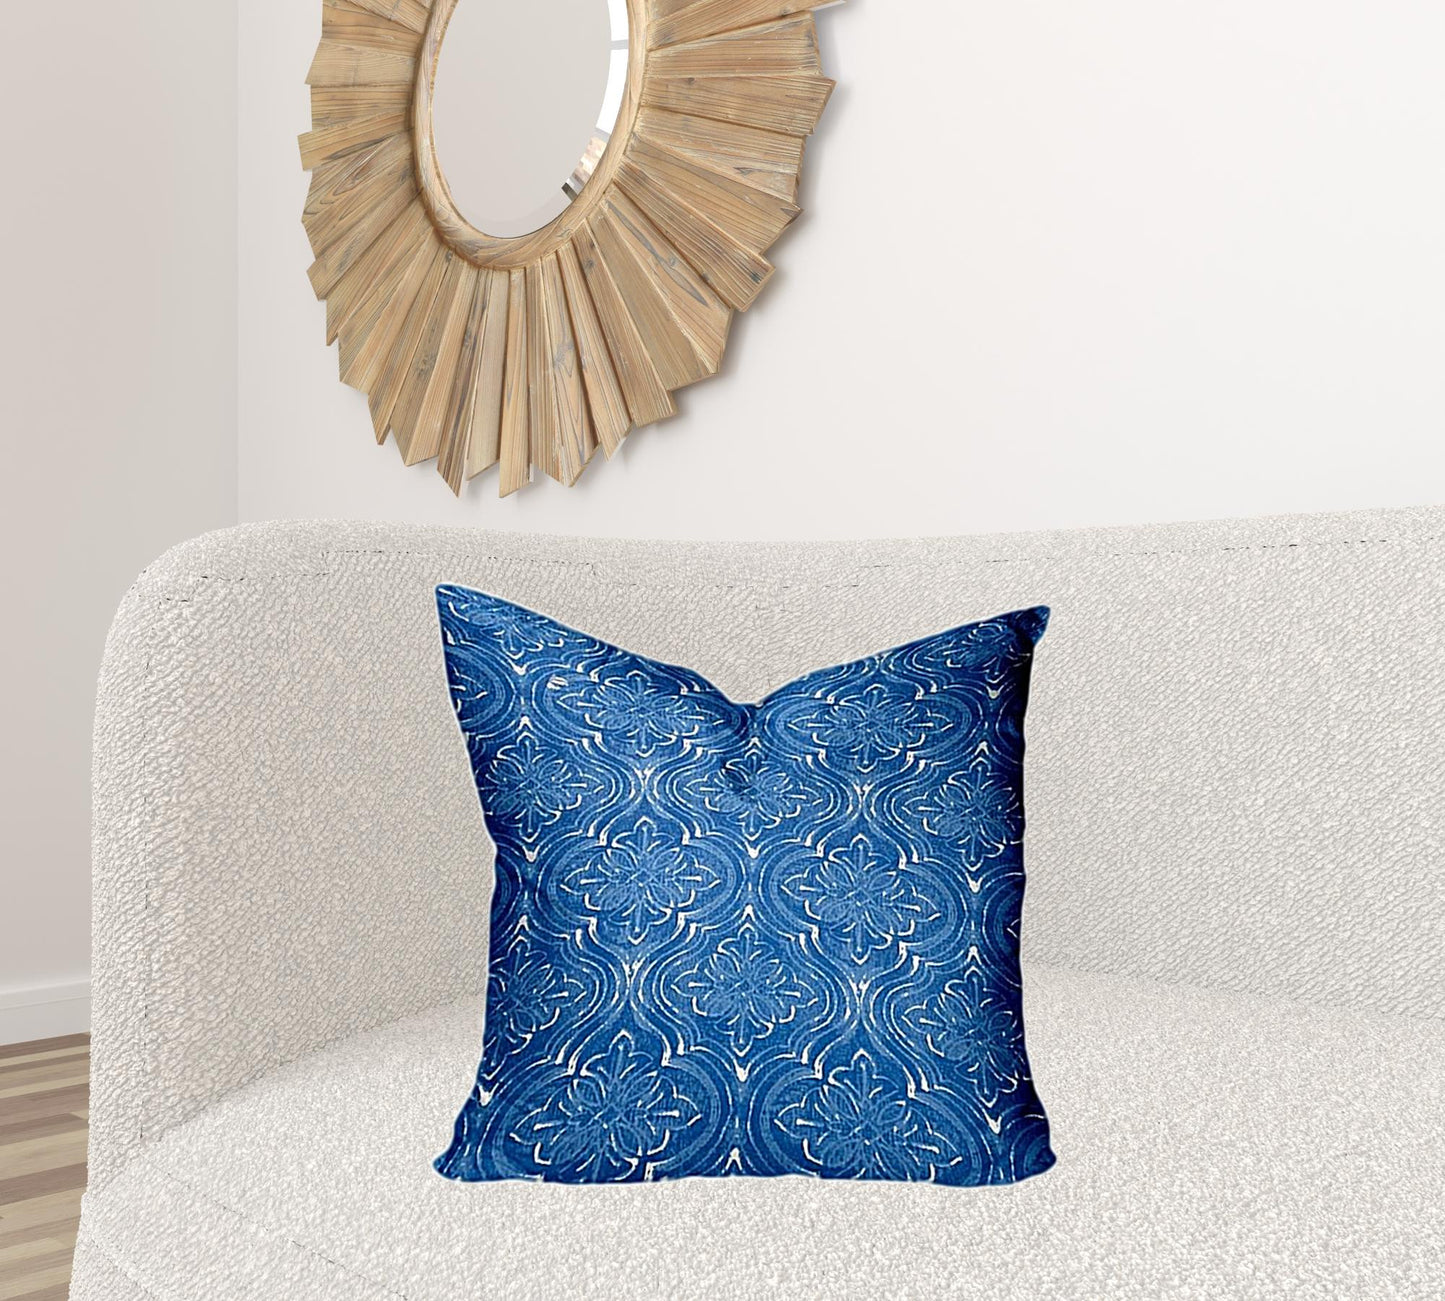 22" X 22" Blue And White Enveloped Ikat Throw Indoor Outdoor Pillow Cover